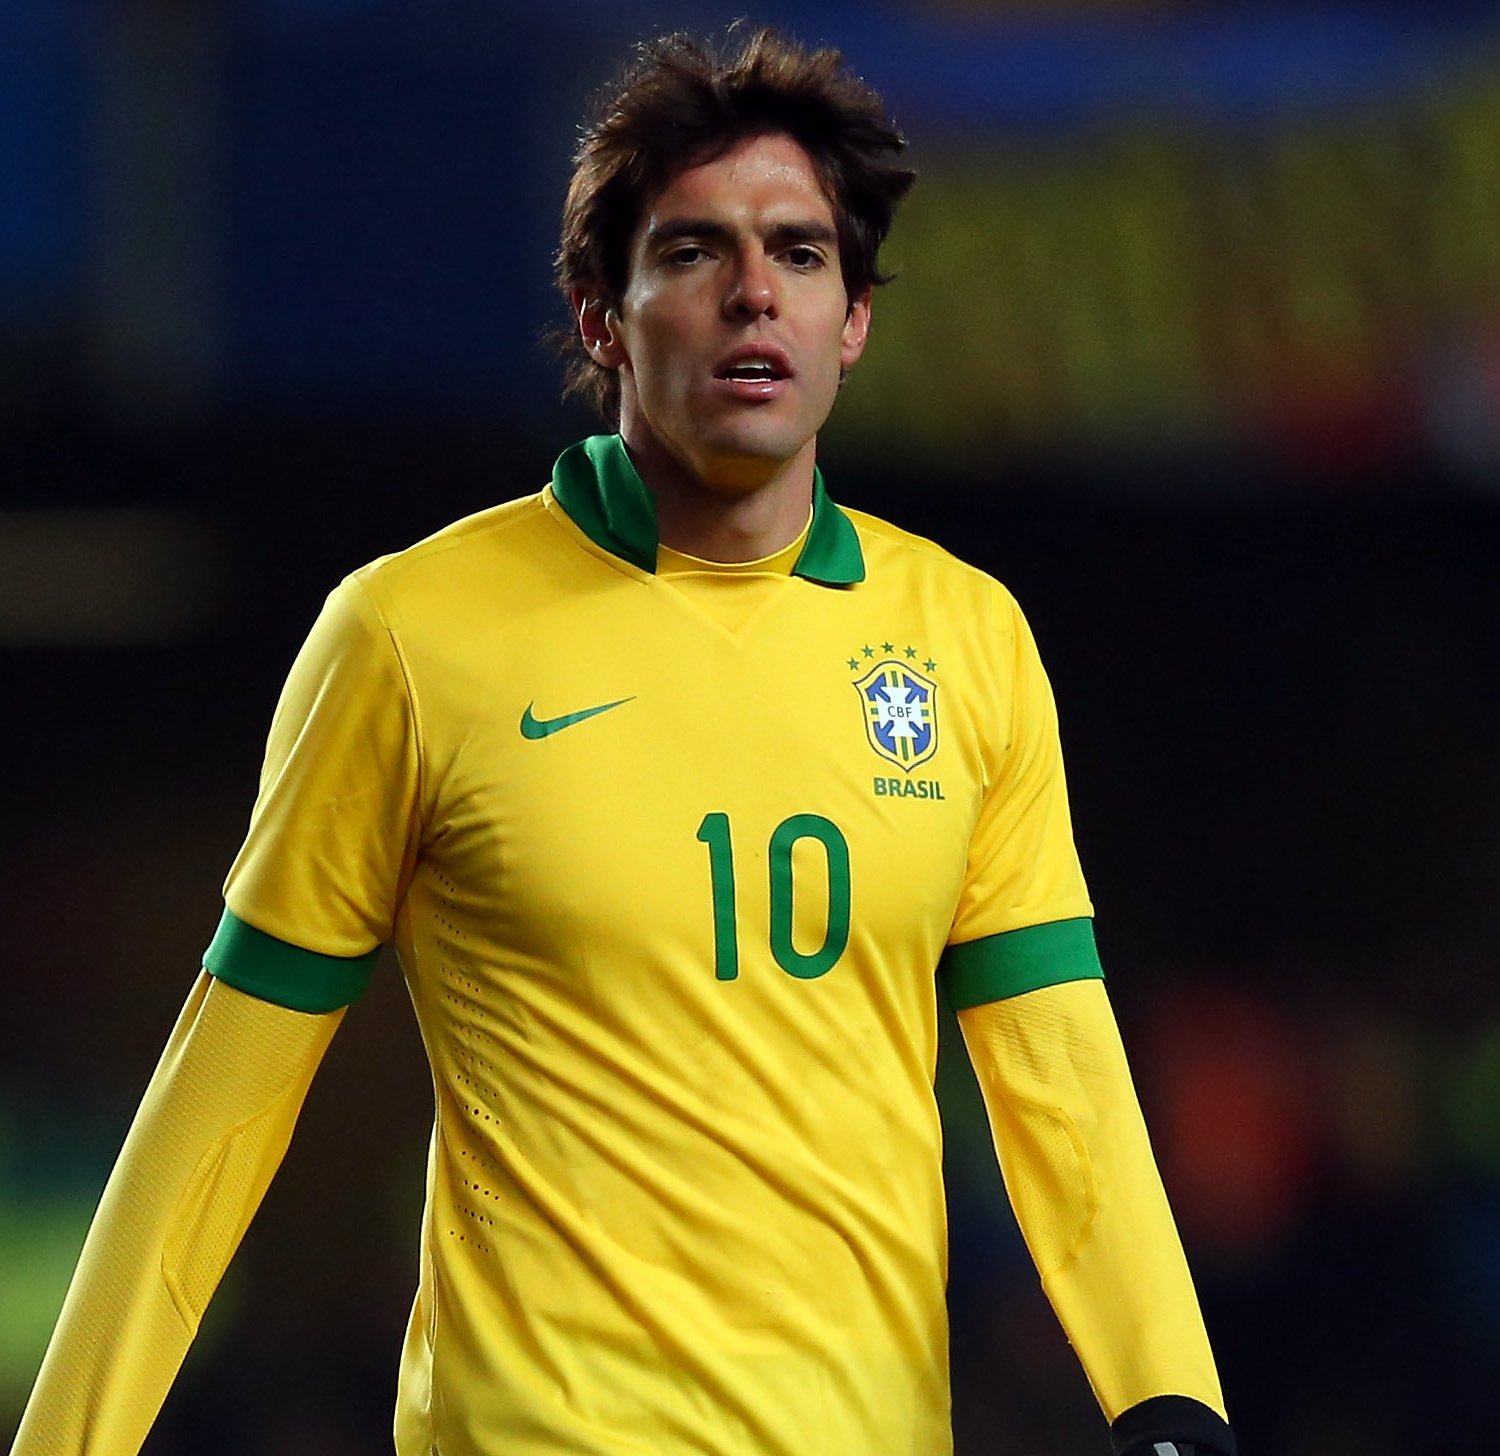 Kaka39;s Second Coming Could Lead to Brazil Return for 2014 FIFA World 